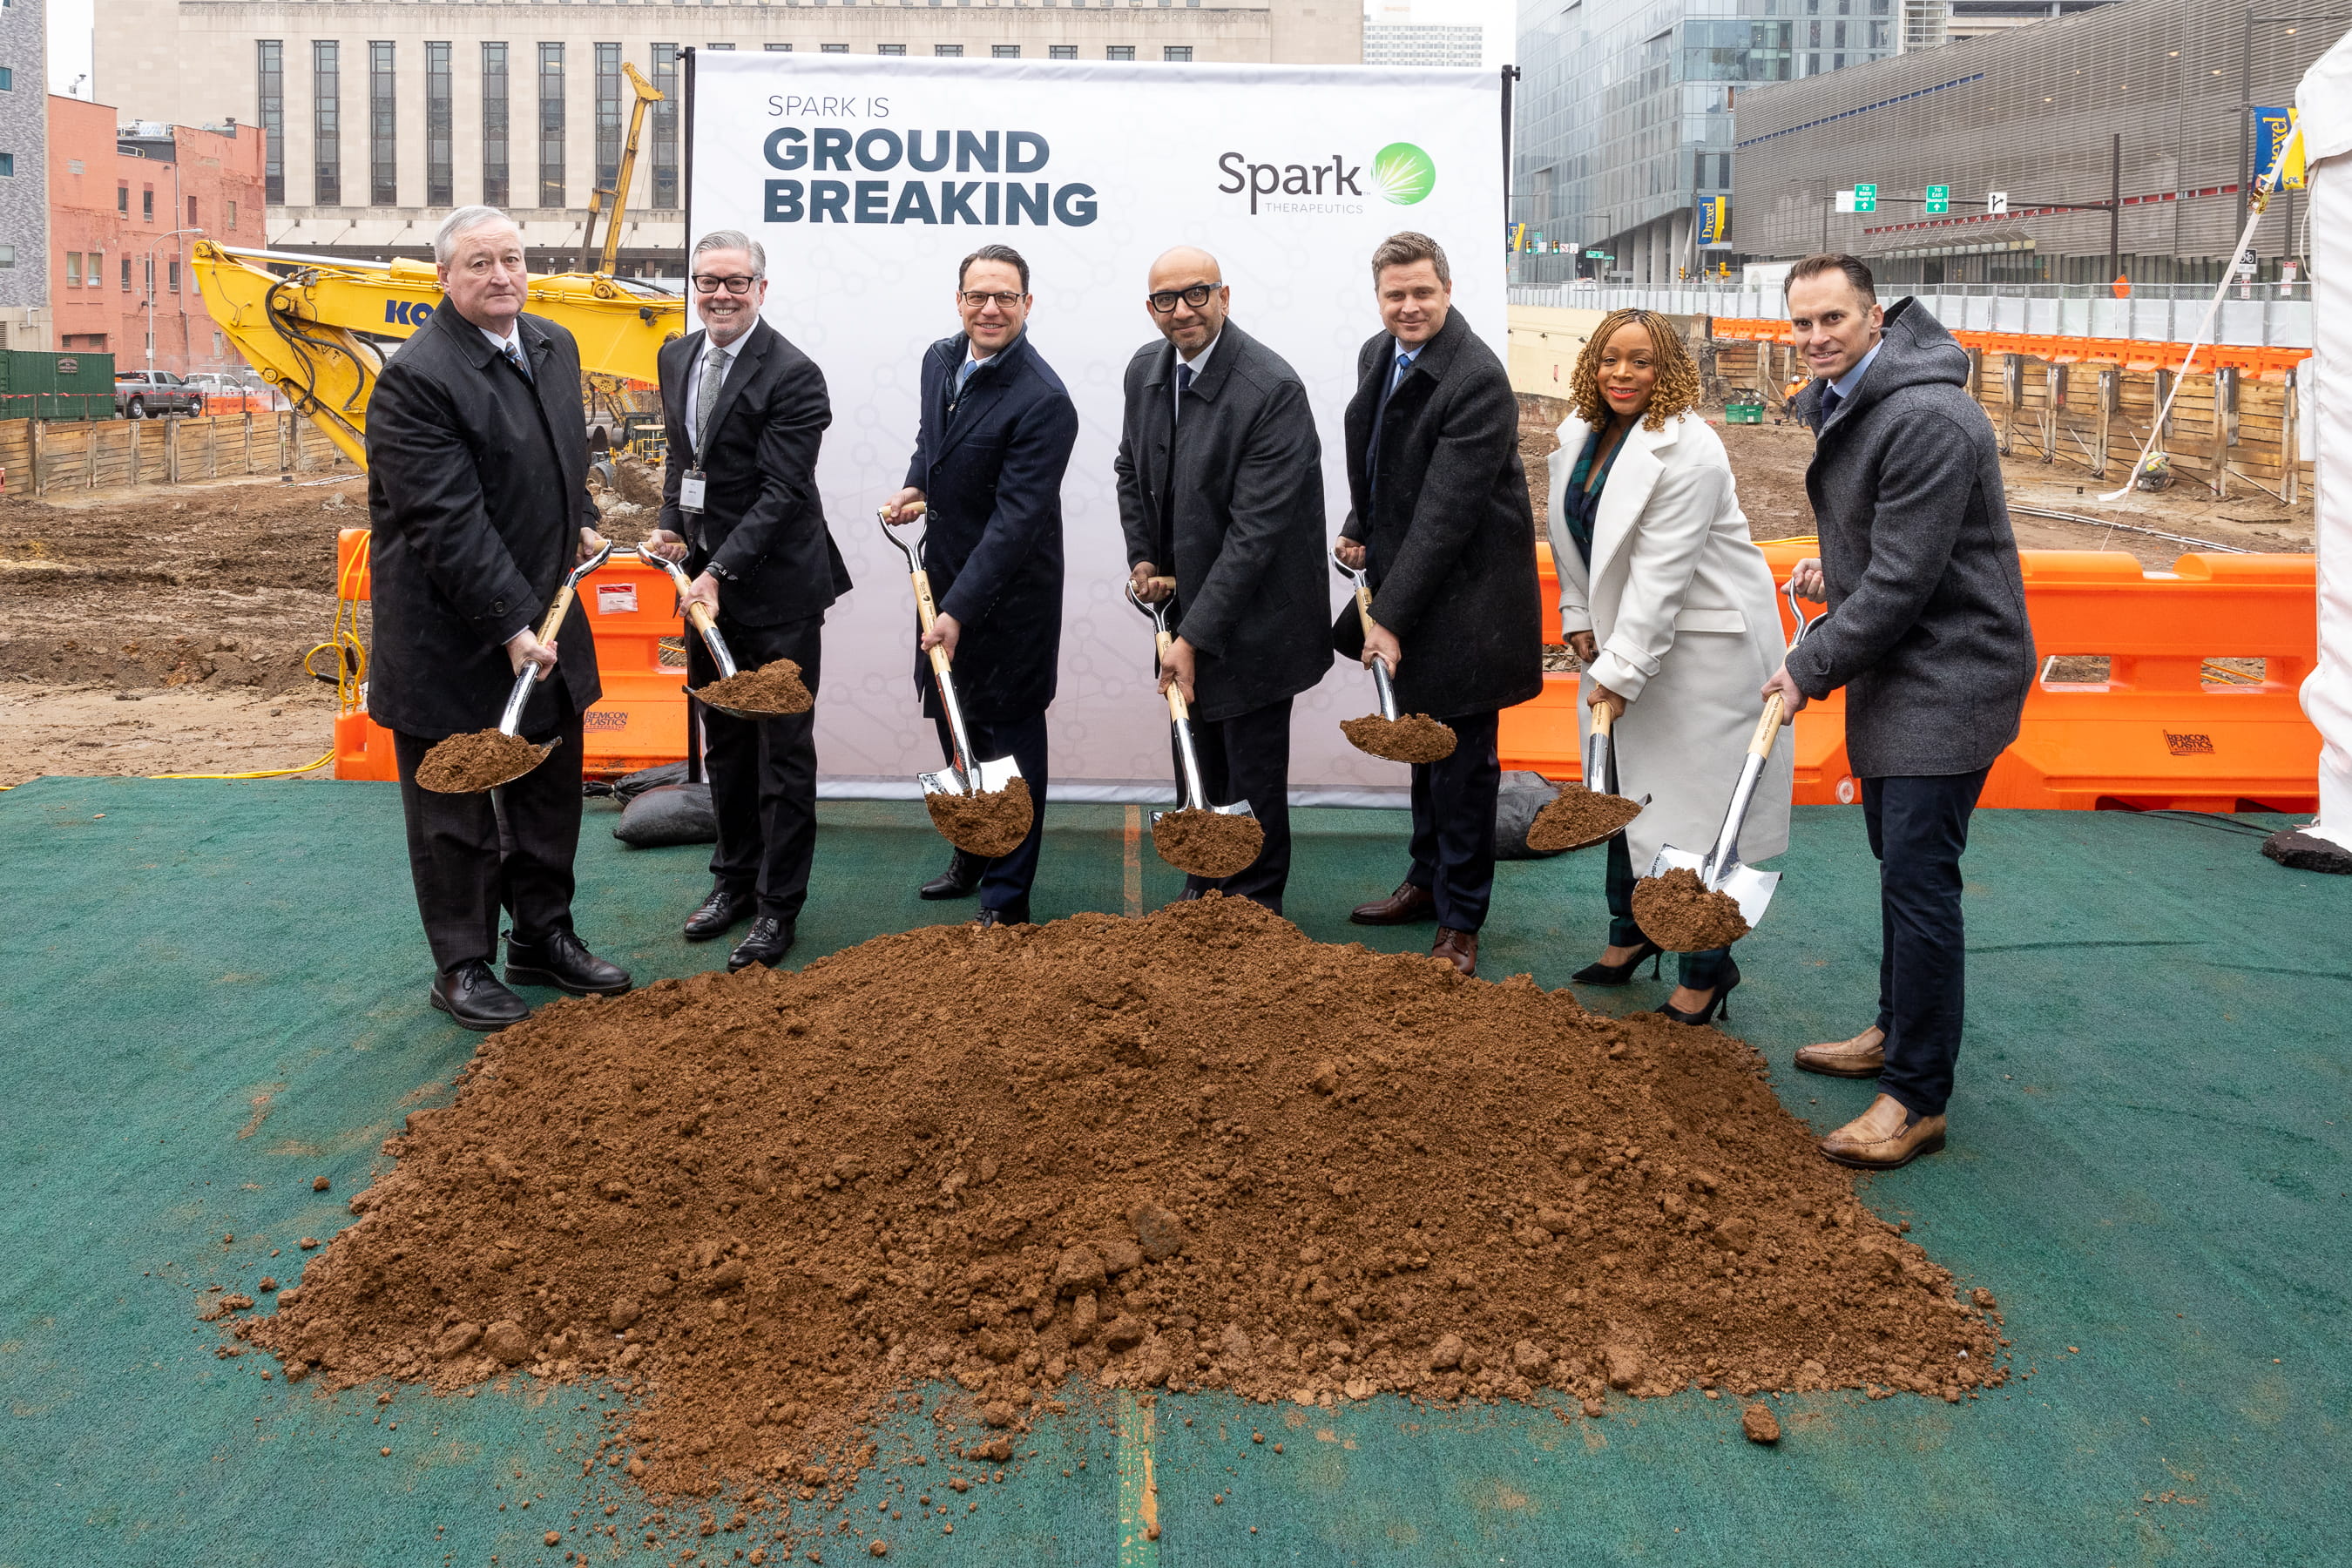 President John Fry standing with former Philadelphia Mayor John Kenny, PA governor Josh Shapiro, and other city officials at Spark Therapeutics construction site. All are posing with shovels.